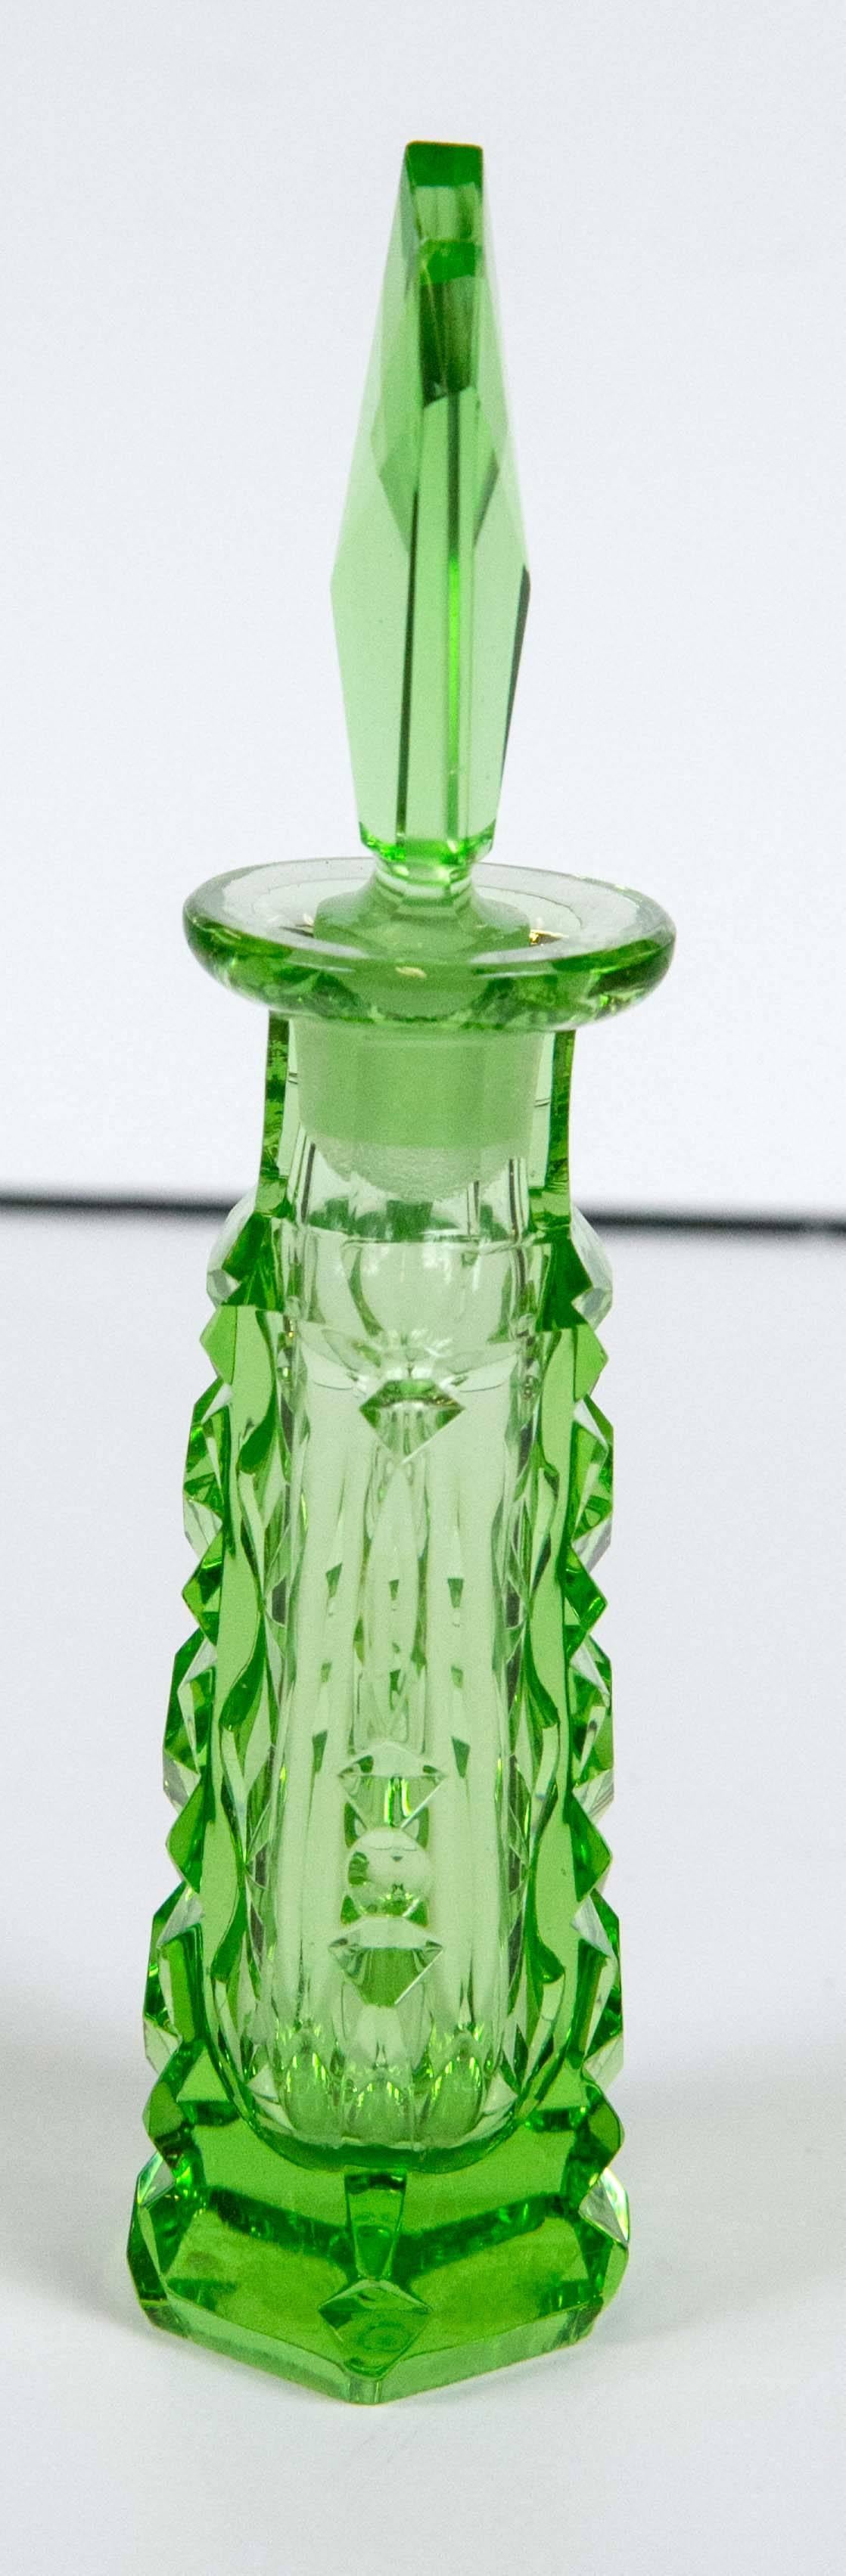 Antique 1920 Czech cut emerald light green Art Deco perfume bottle in excellent condition. Beautiful color and brilliance in the cut of the crystal.
Just one of a large collection of antiques we acquired from a private collector.